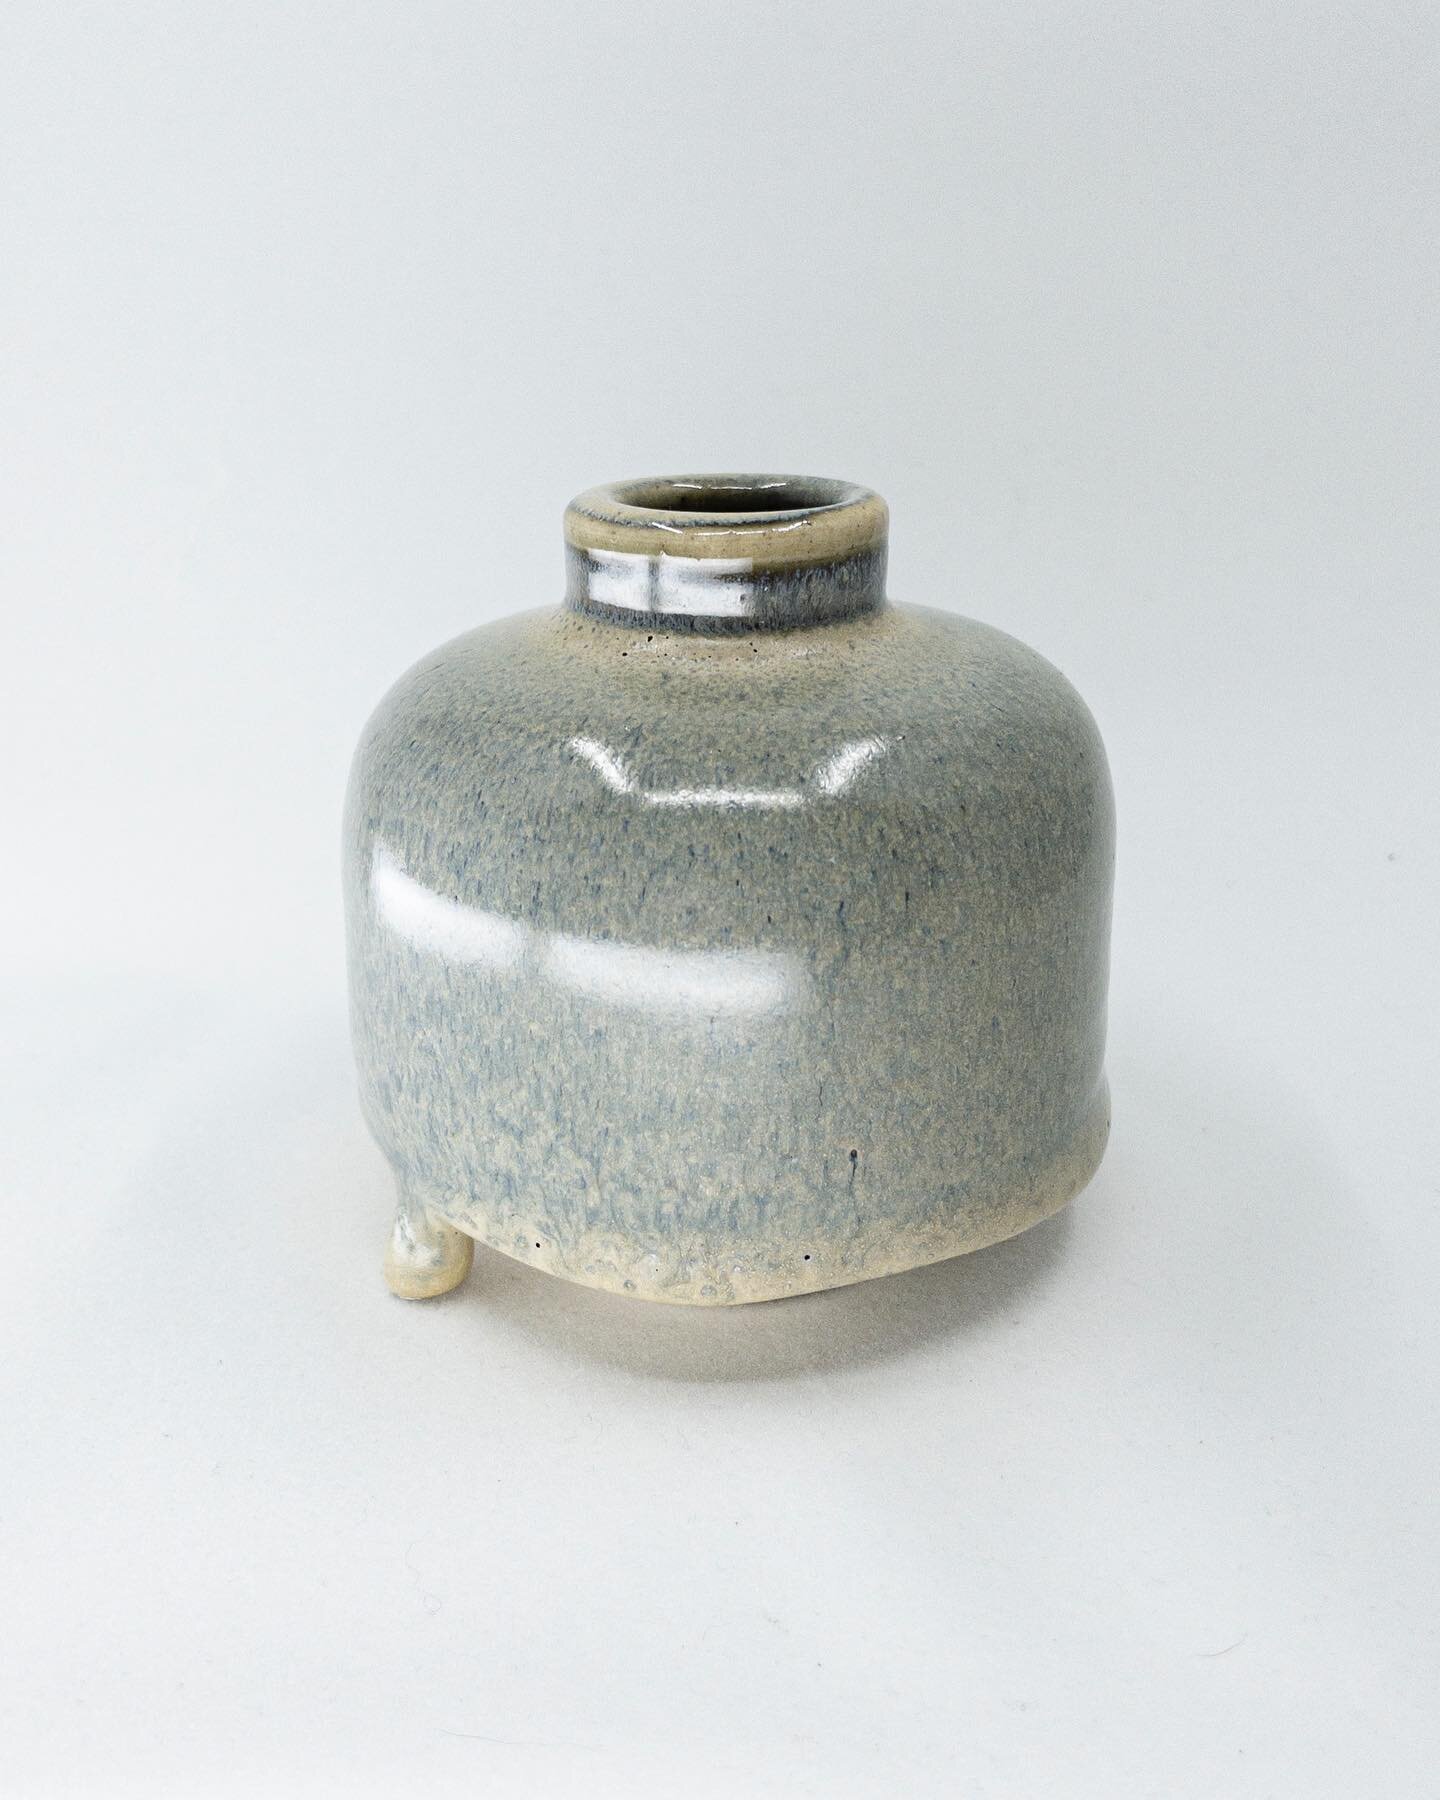 From the archive: The Drip Keg. A small stoneware vase with a combination of midfire glazes. The glaze ran more than I thought it would, but it wound up with this nice texture around the neck and a cool little drippy bit. I used it as a holder for my